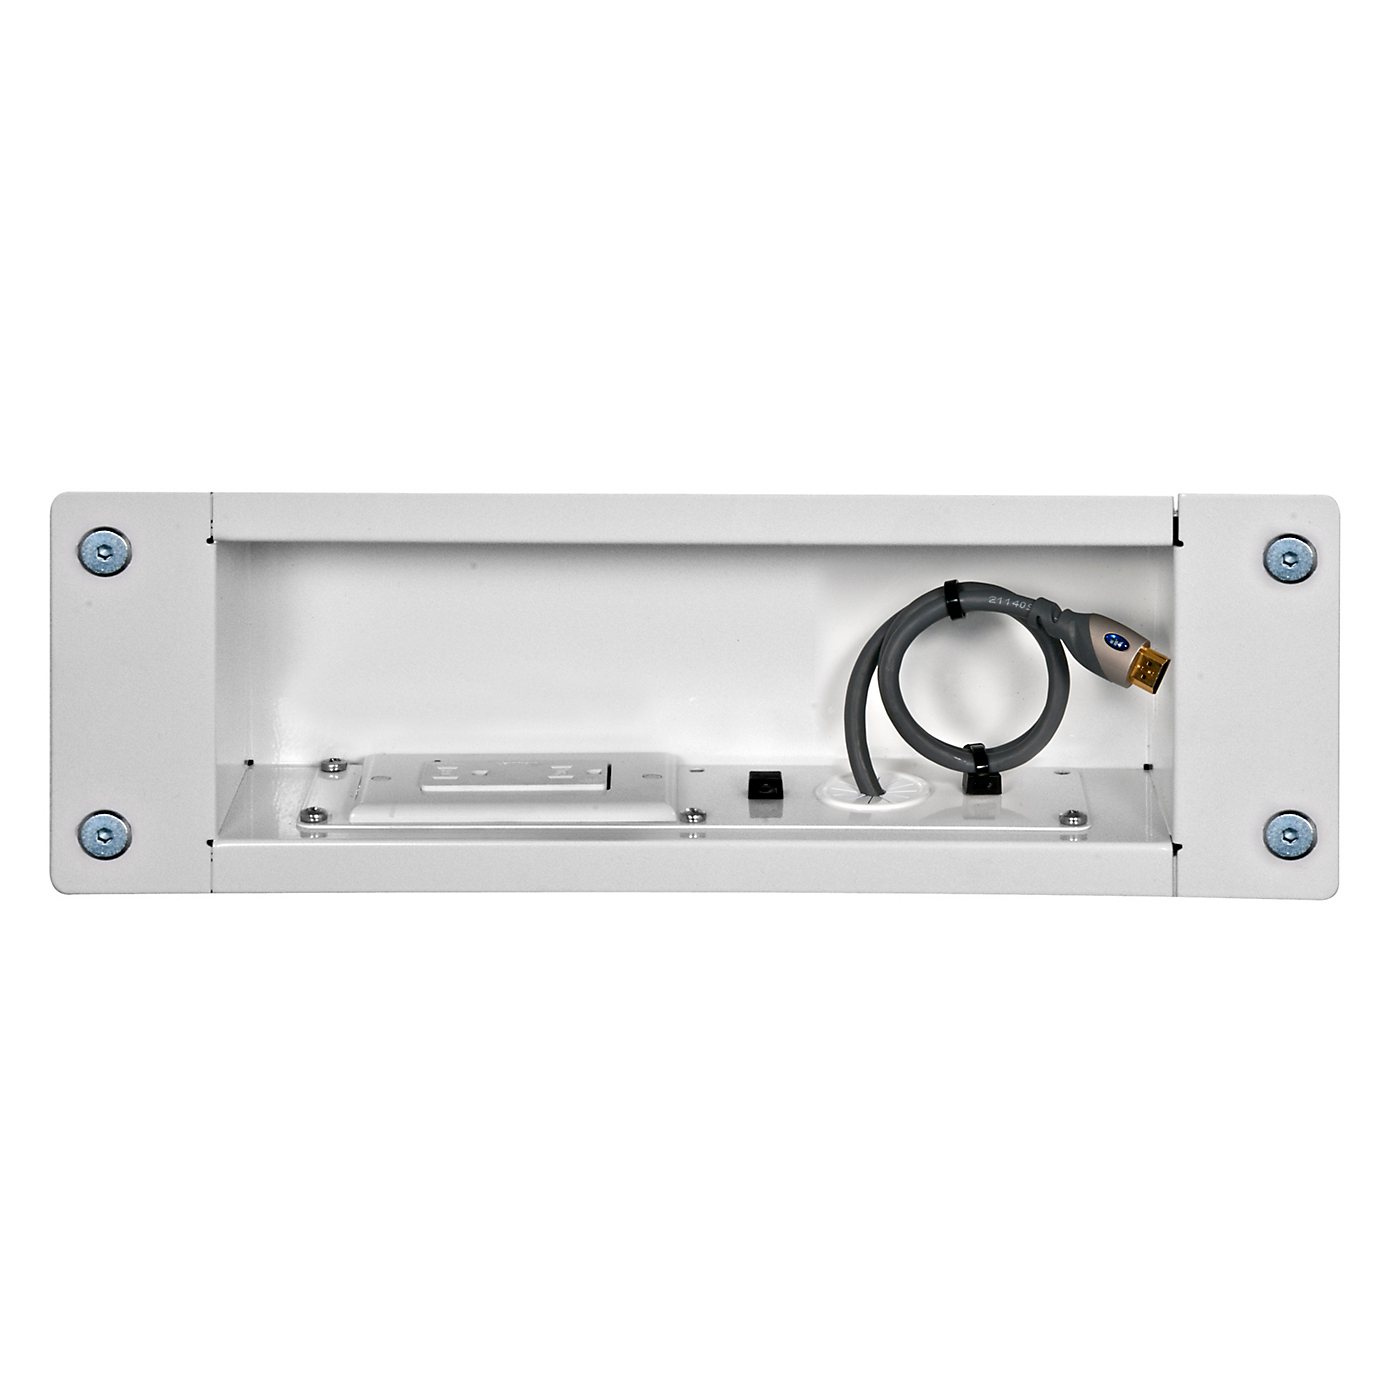 IBA3AC-W In-wall Metal Box Medium w/1 knock out and power outlet for A/V Accessories